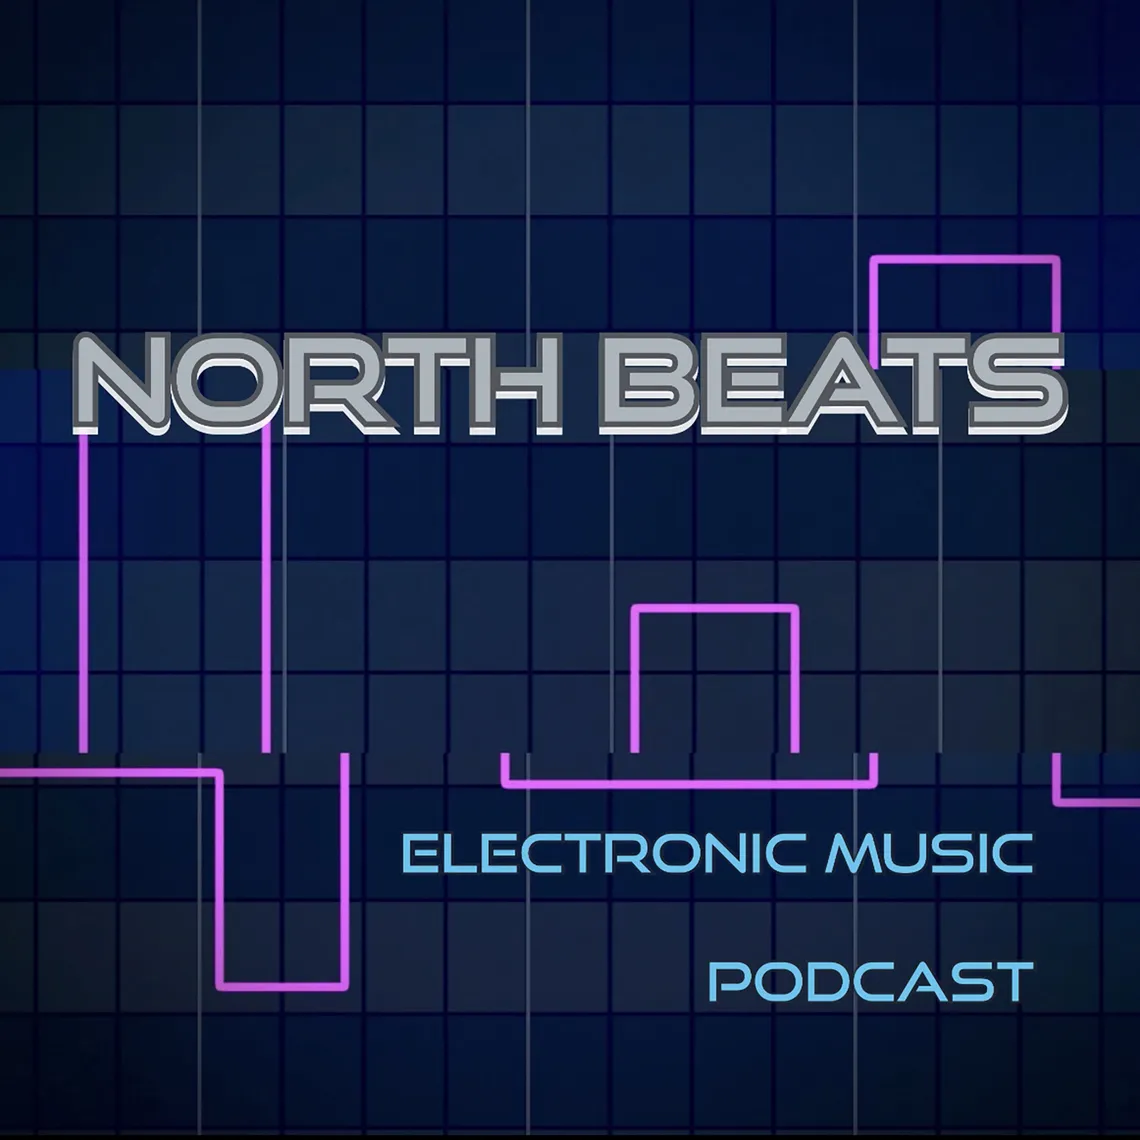 Andrew Belt interview on North Beats podcast